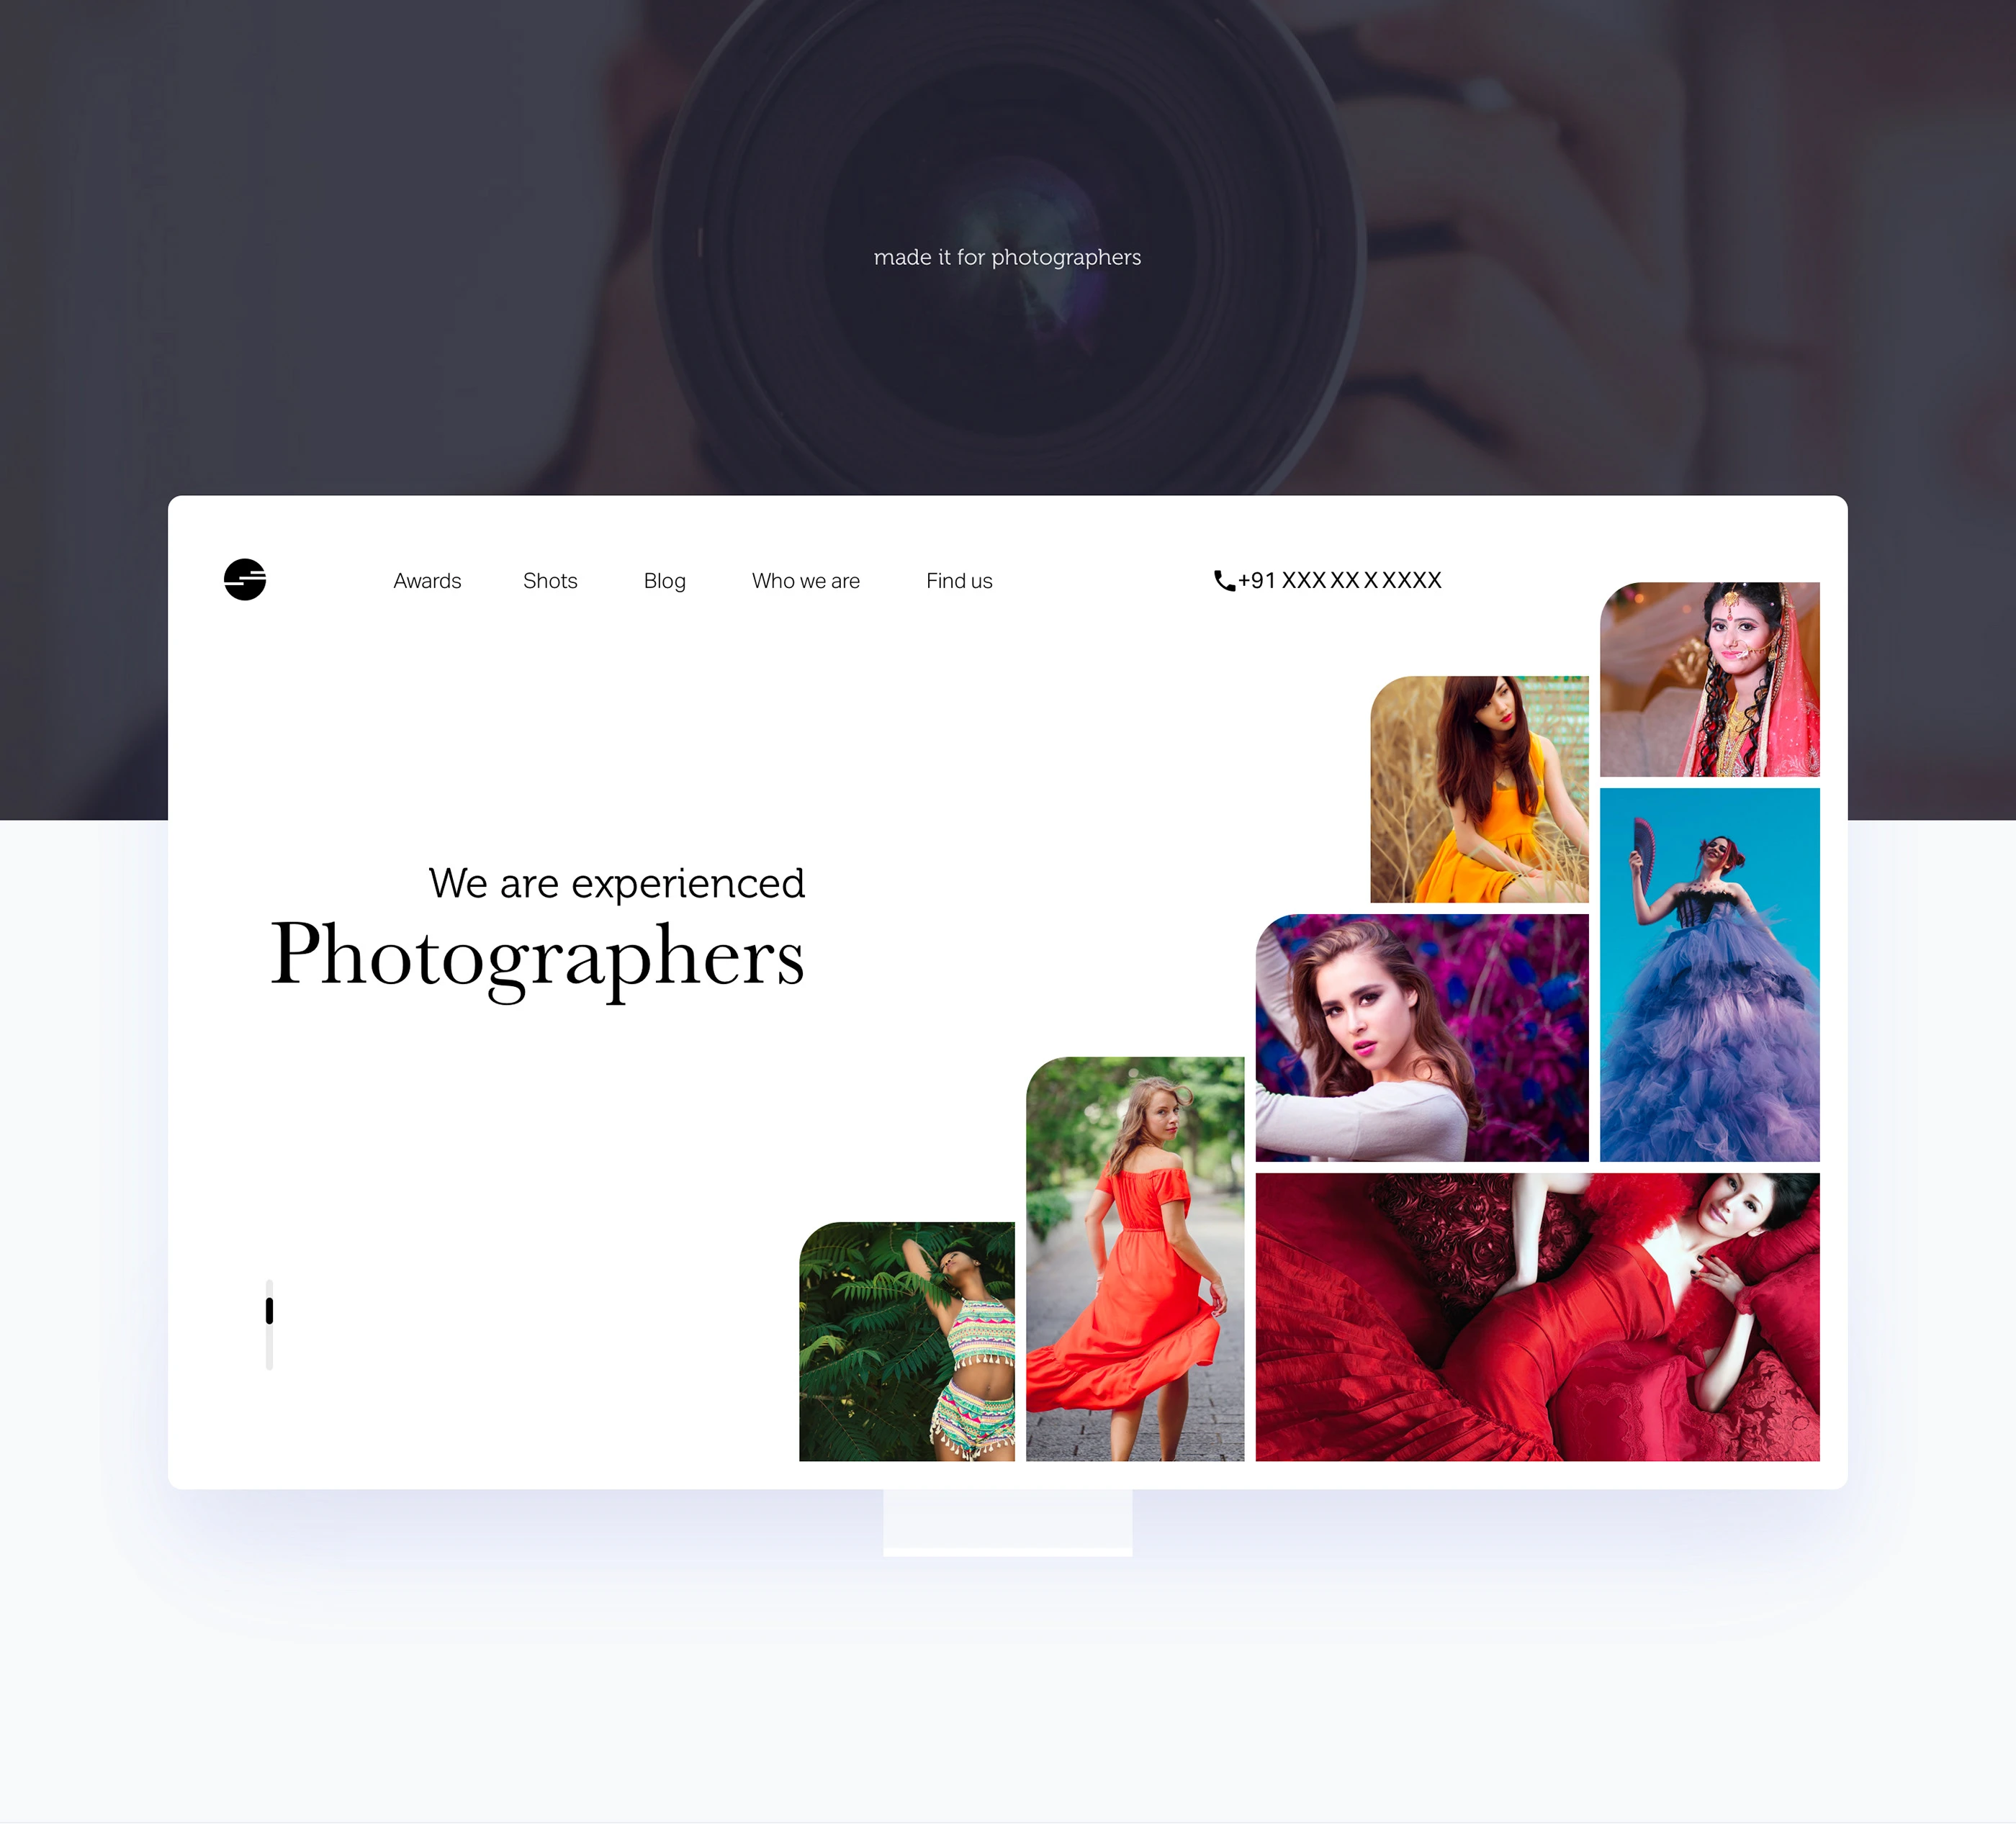 Photographer Portfolio Website - The concept revolves around Black & White and no other colors involved except the photographs which come with the colors of a rainbow in the landing screen. I made this design using Sketch App and Adobe XD with many of the features/sections including responsive design where you can easily customize them however you like.